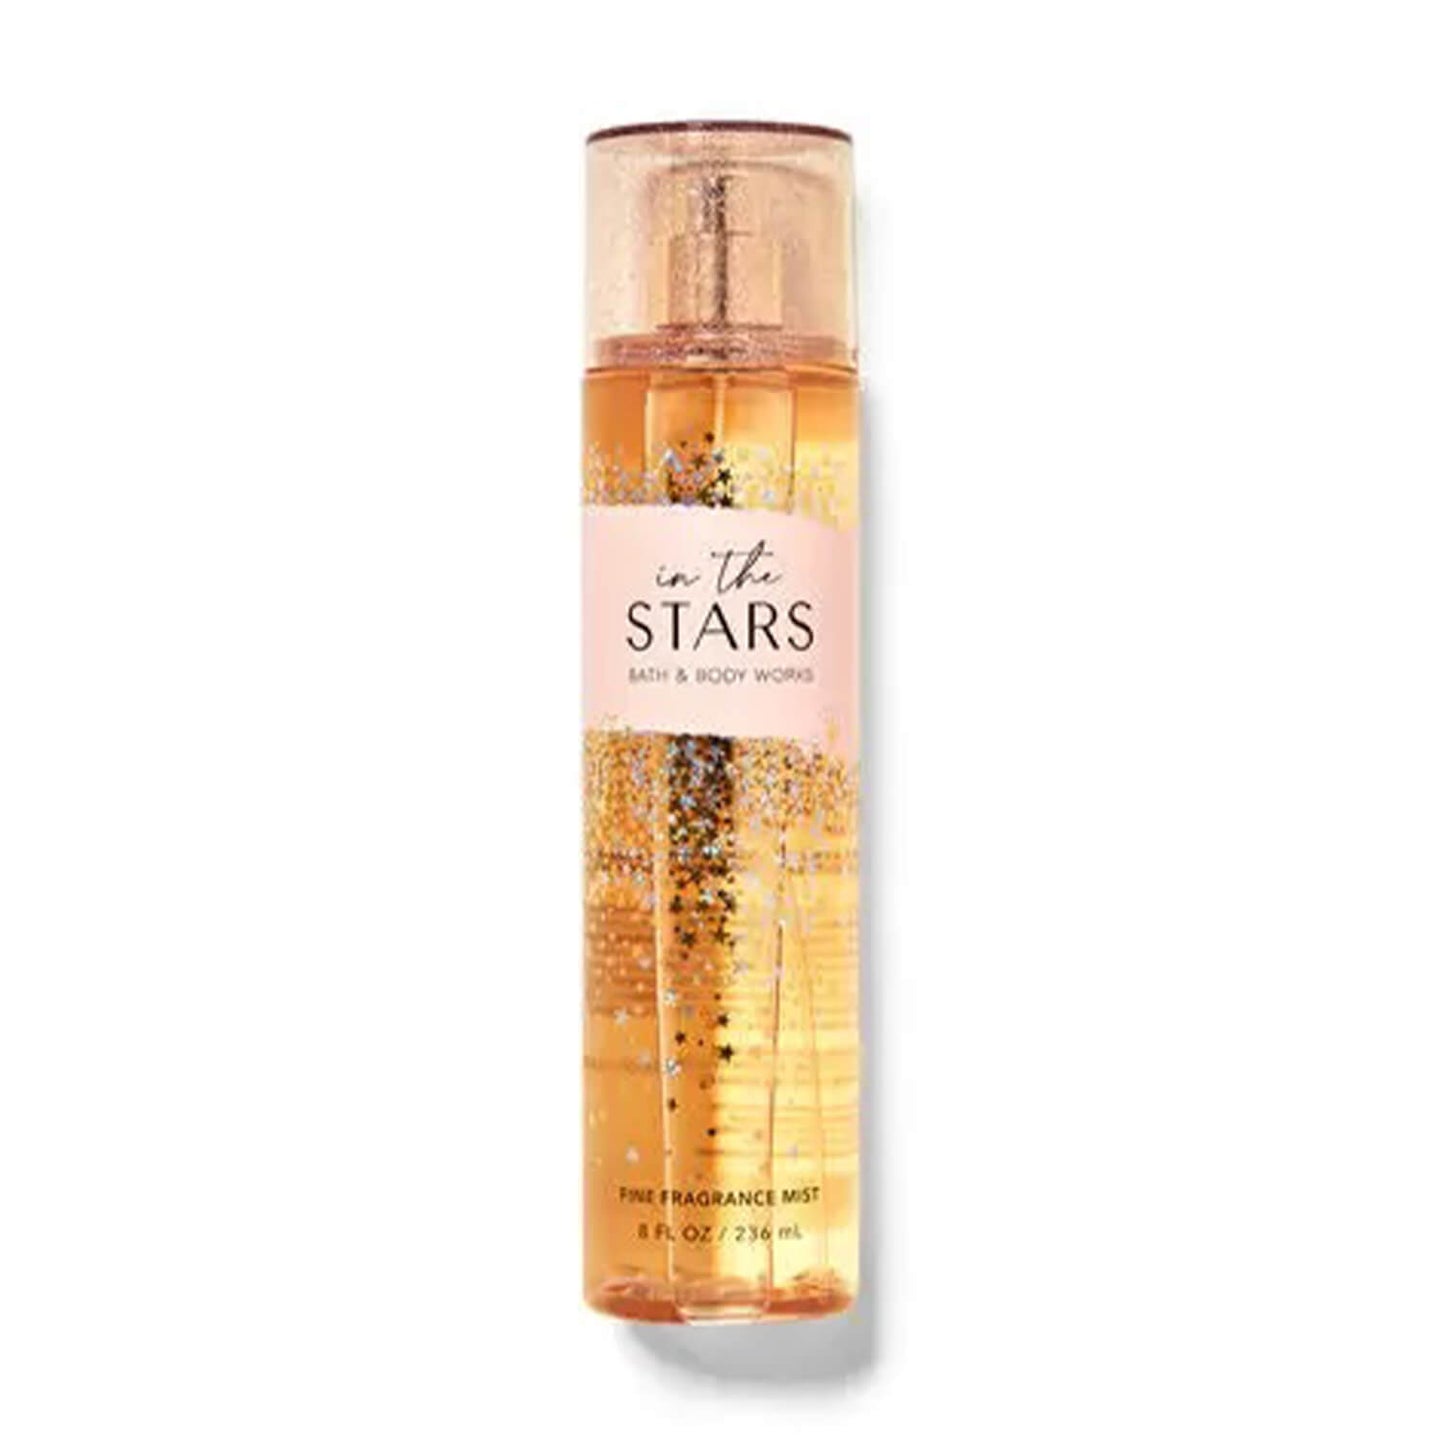 Bath and Body Works Fragrance Mist - In The Stars